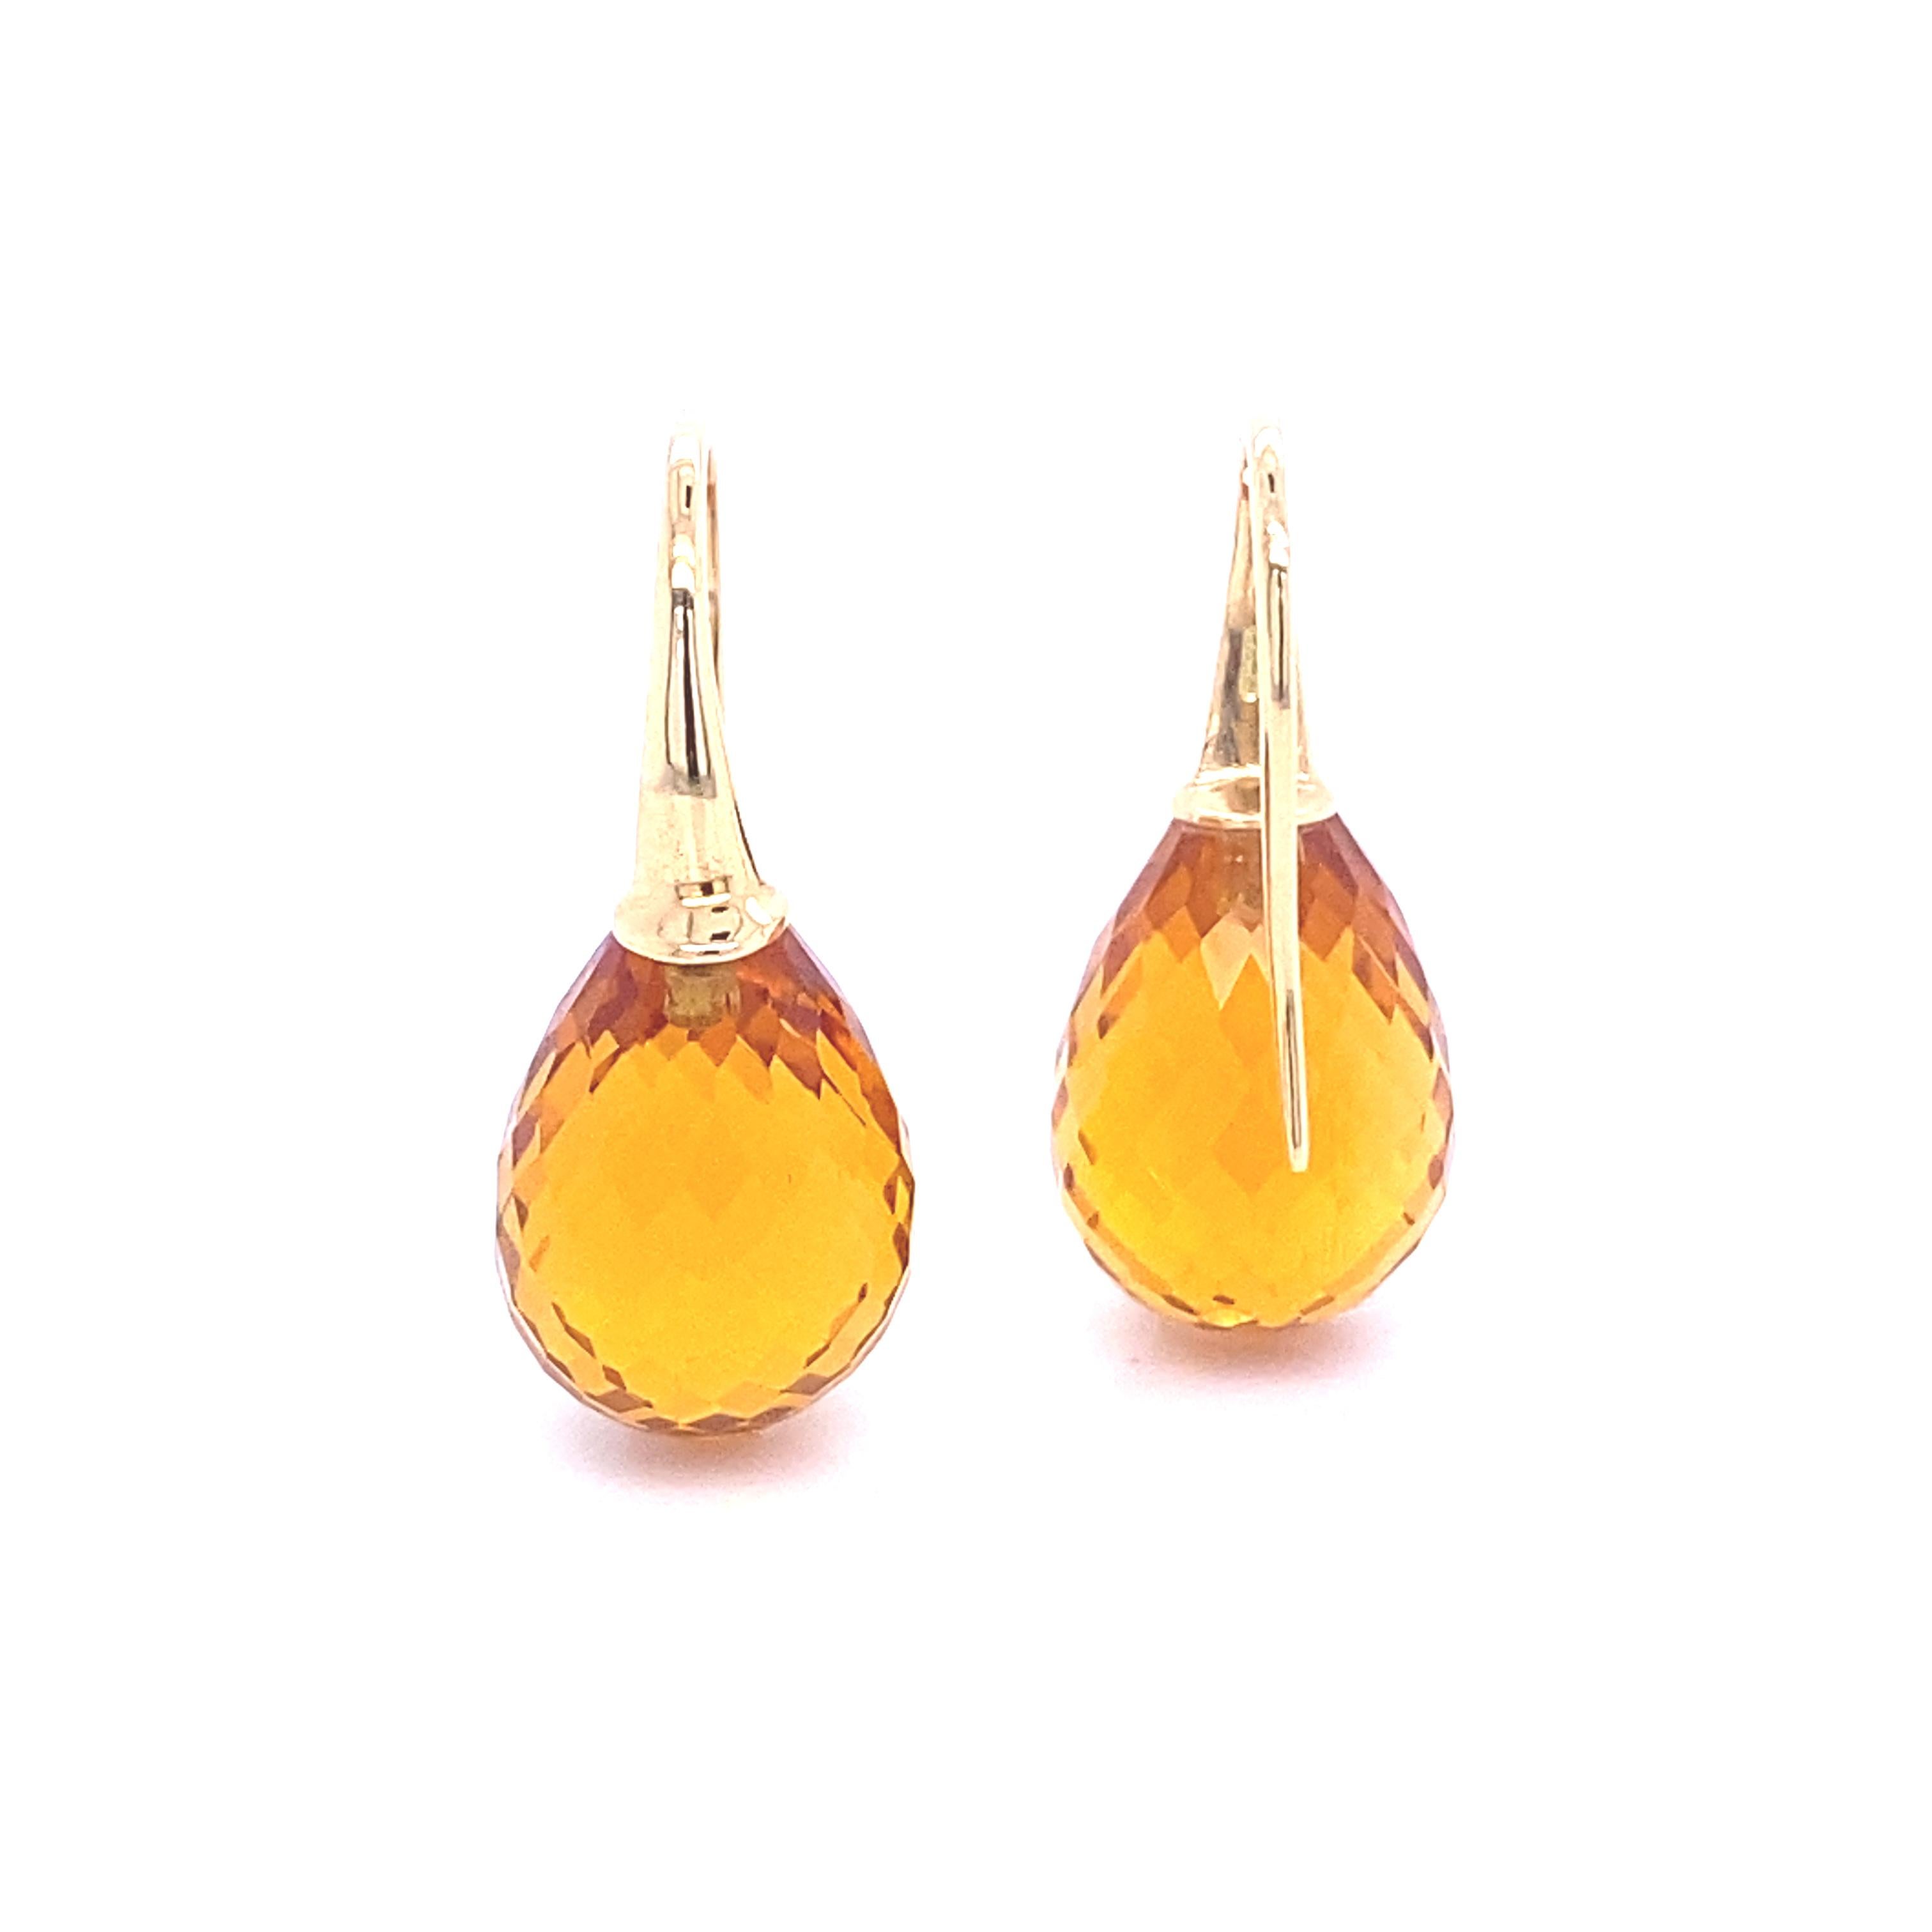 Baroque Drop Earrings in Yellow Gold with a Hydro Citrine For Sale